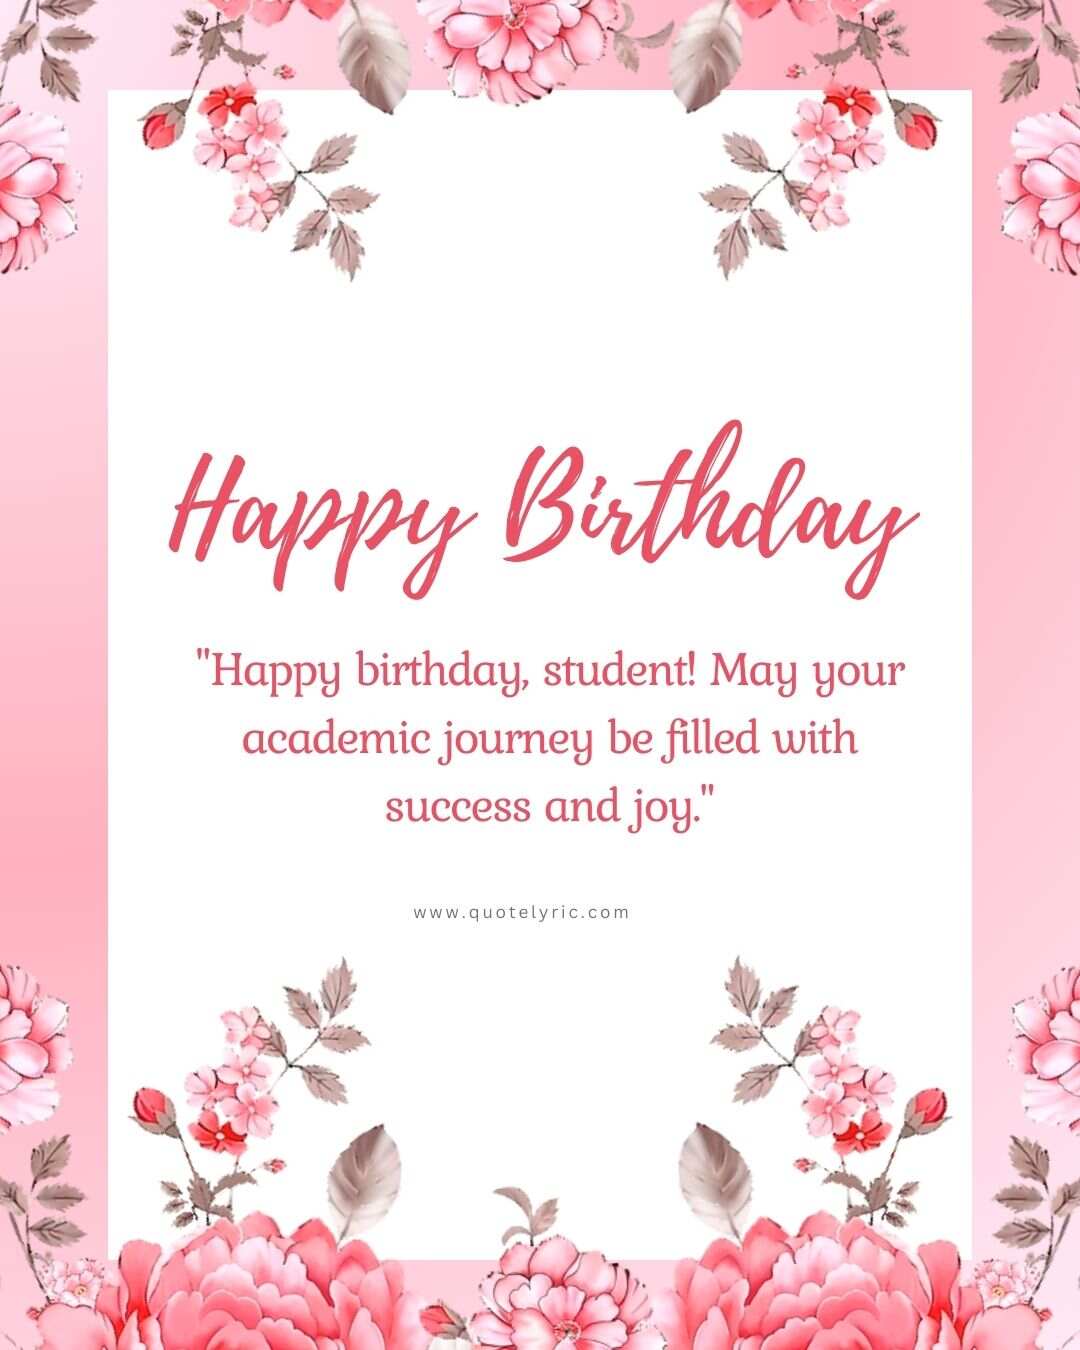 100 Best Wishes Quotes for Student Birthday - Quotelyric